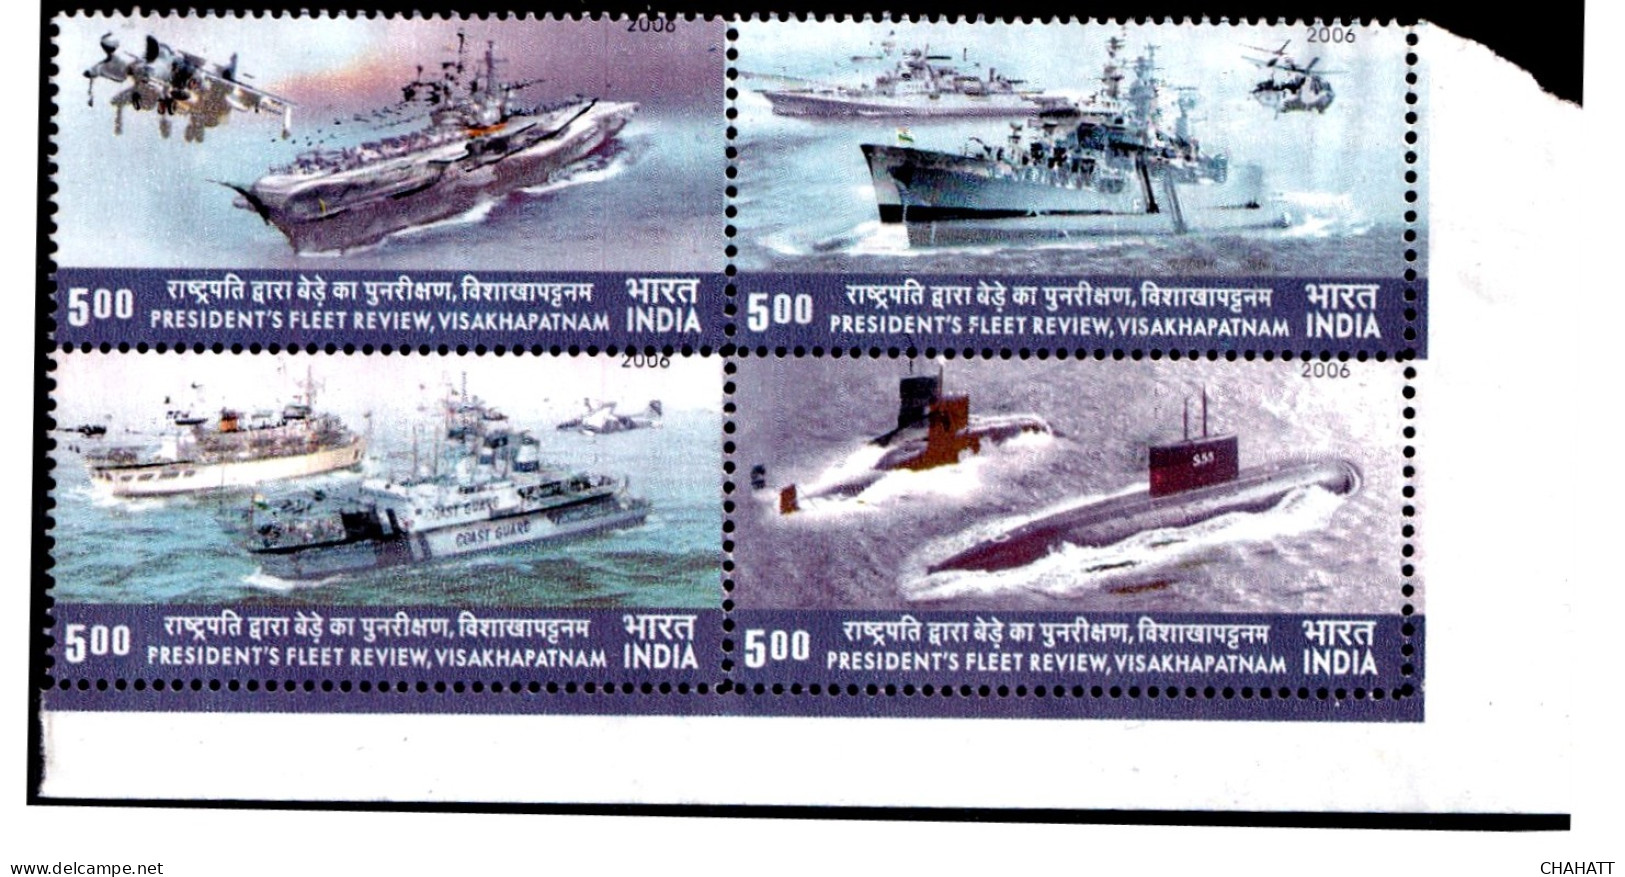 INDIA-2006- PRESIDENT'S FLEET REVIEW- ERROR- HELICOPTERS- NAVAL SHIPS-GHOST IMAGES- SETENANT BLK OF 4-MNH-IE-47 - Varietà & Curiosità